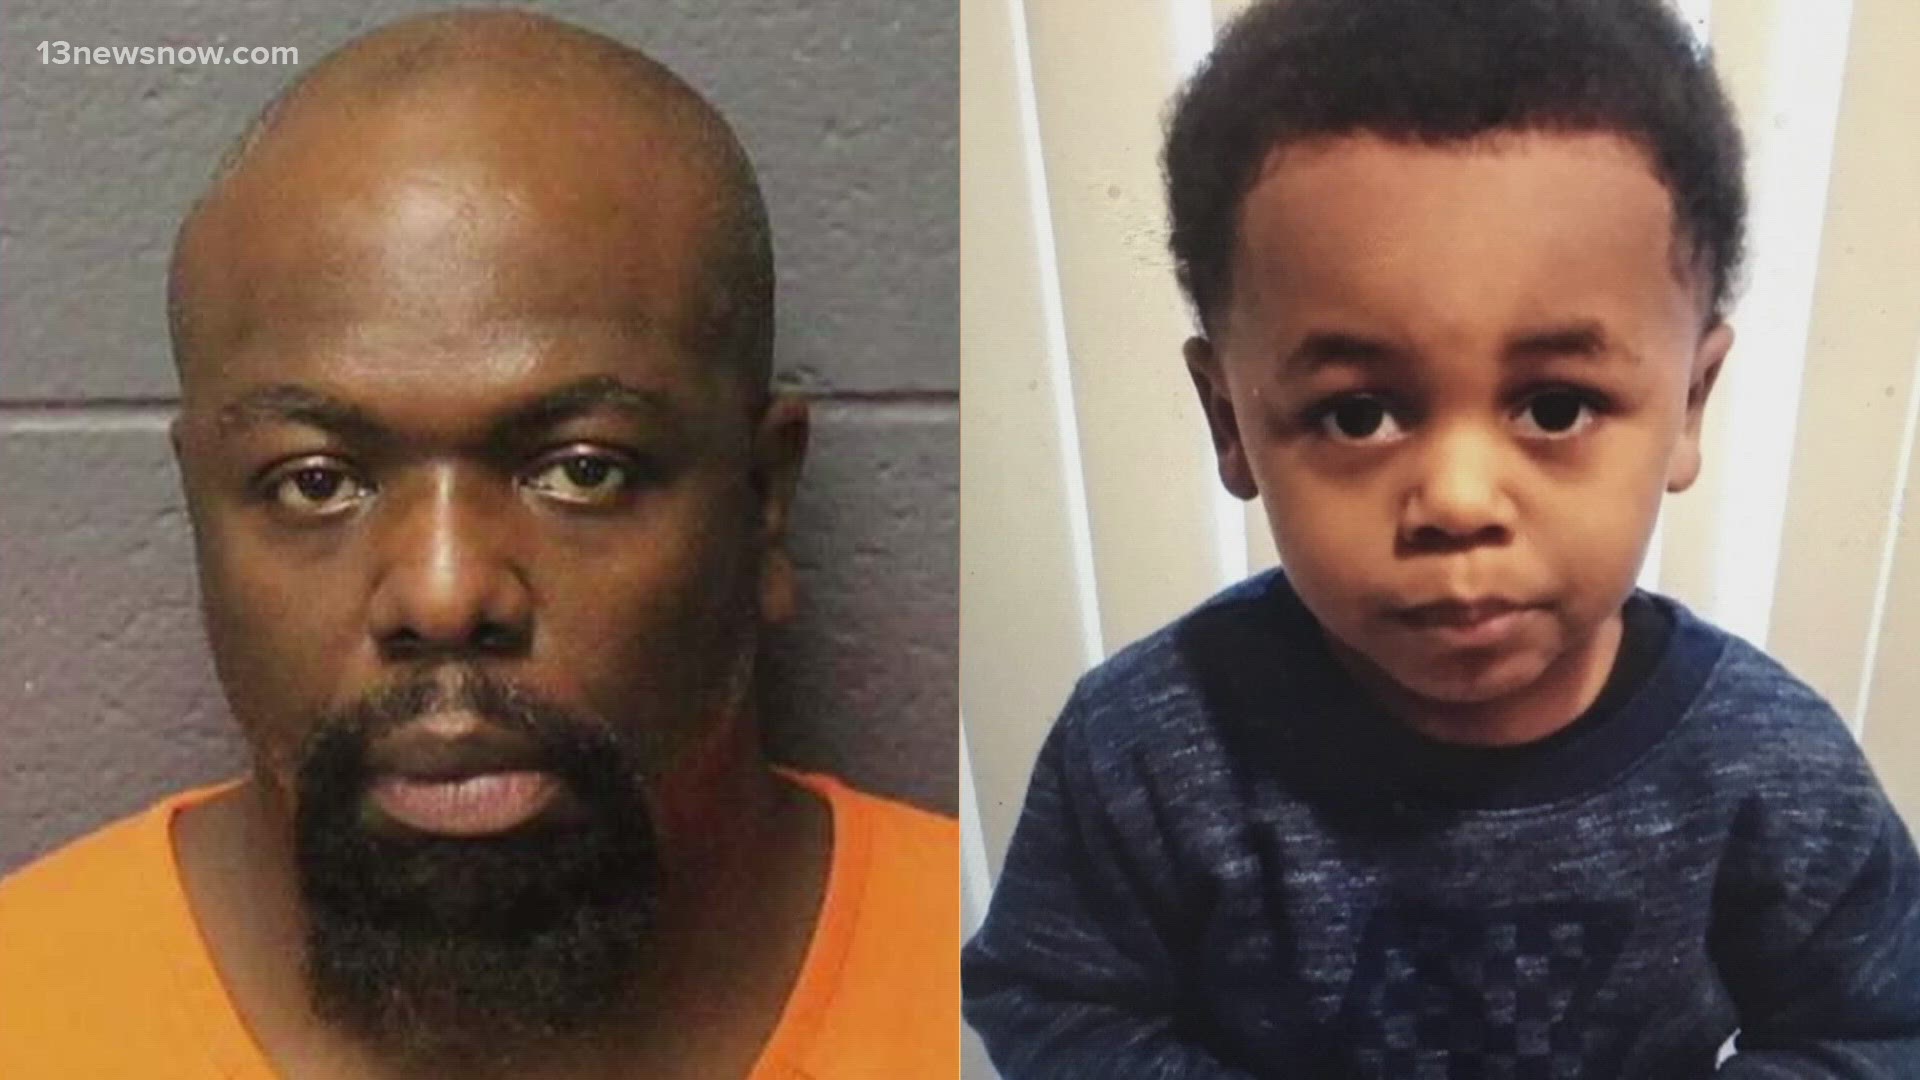 Bigsby is currently facing murder and conceal body charges in connection to his son Codi’s disappearance.